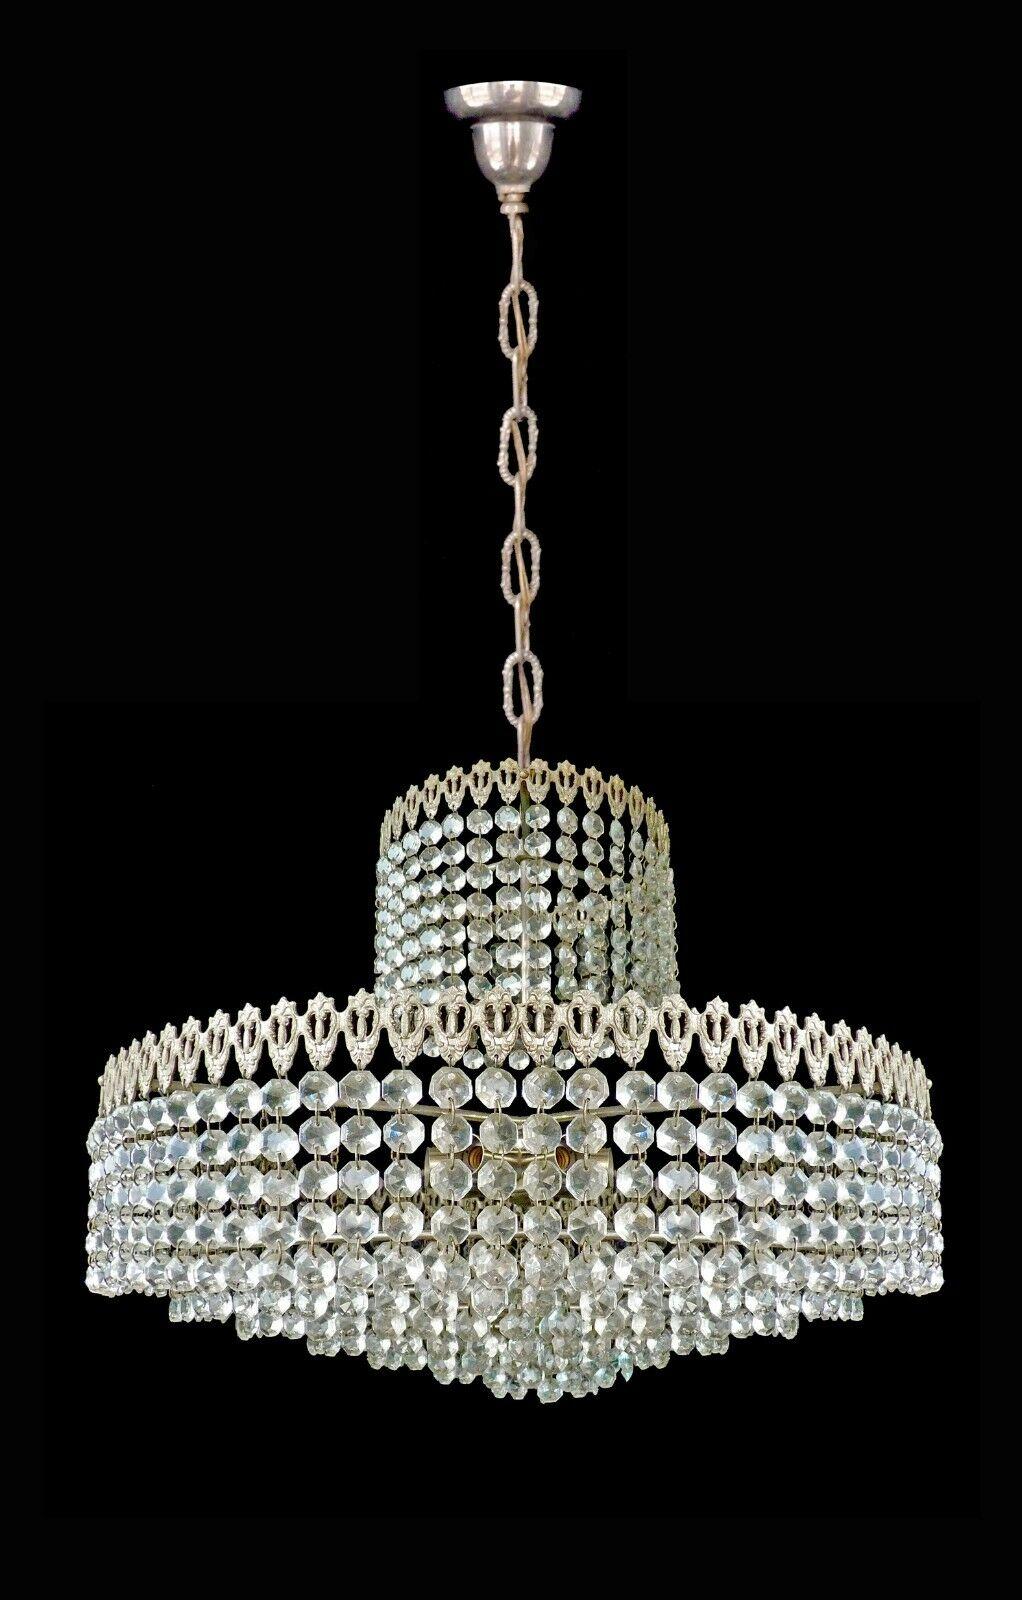 French Hollywood Regency Chrome Cut Crystal Beads 8tiers Wedding Cake Chandelier For Sale 3